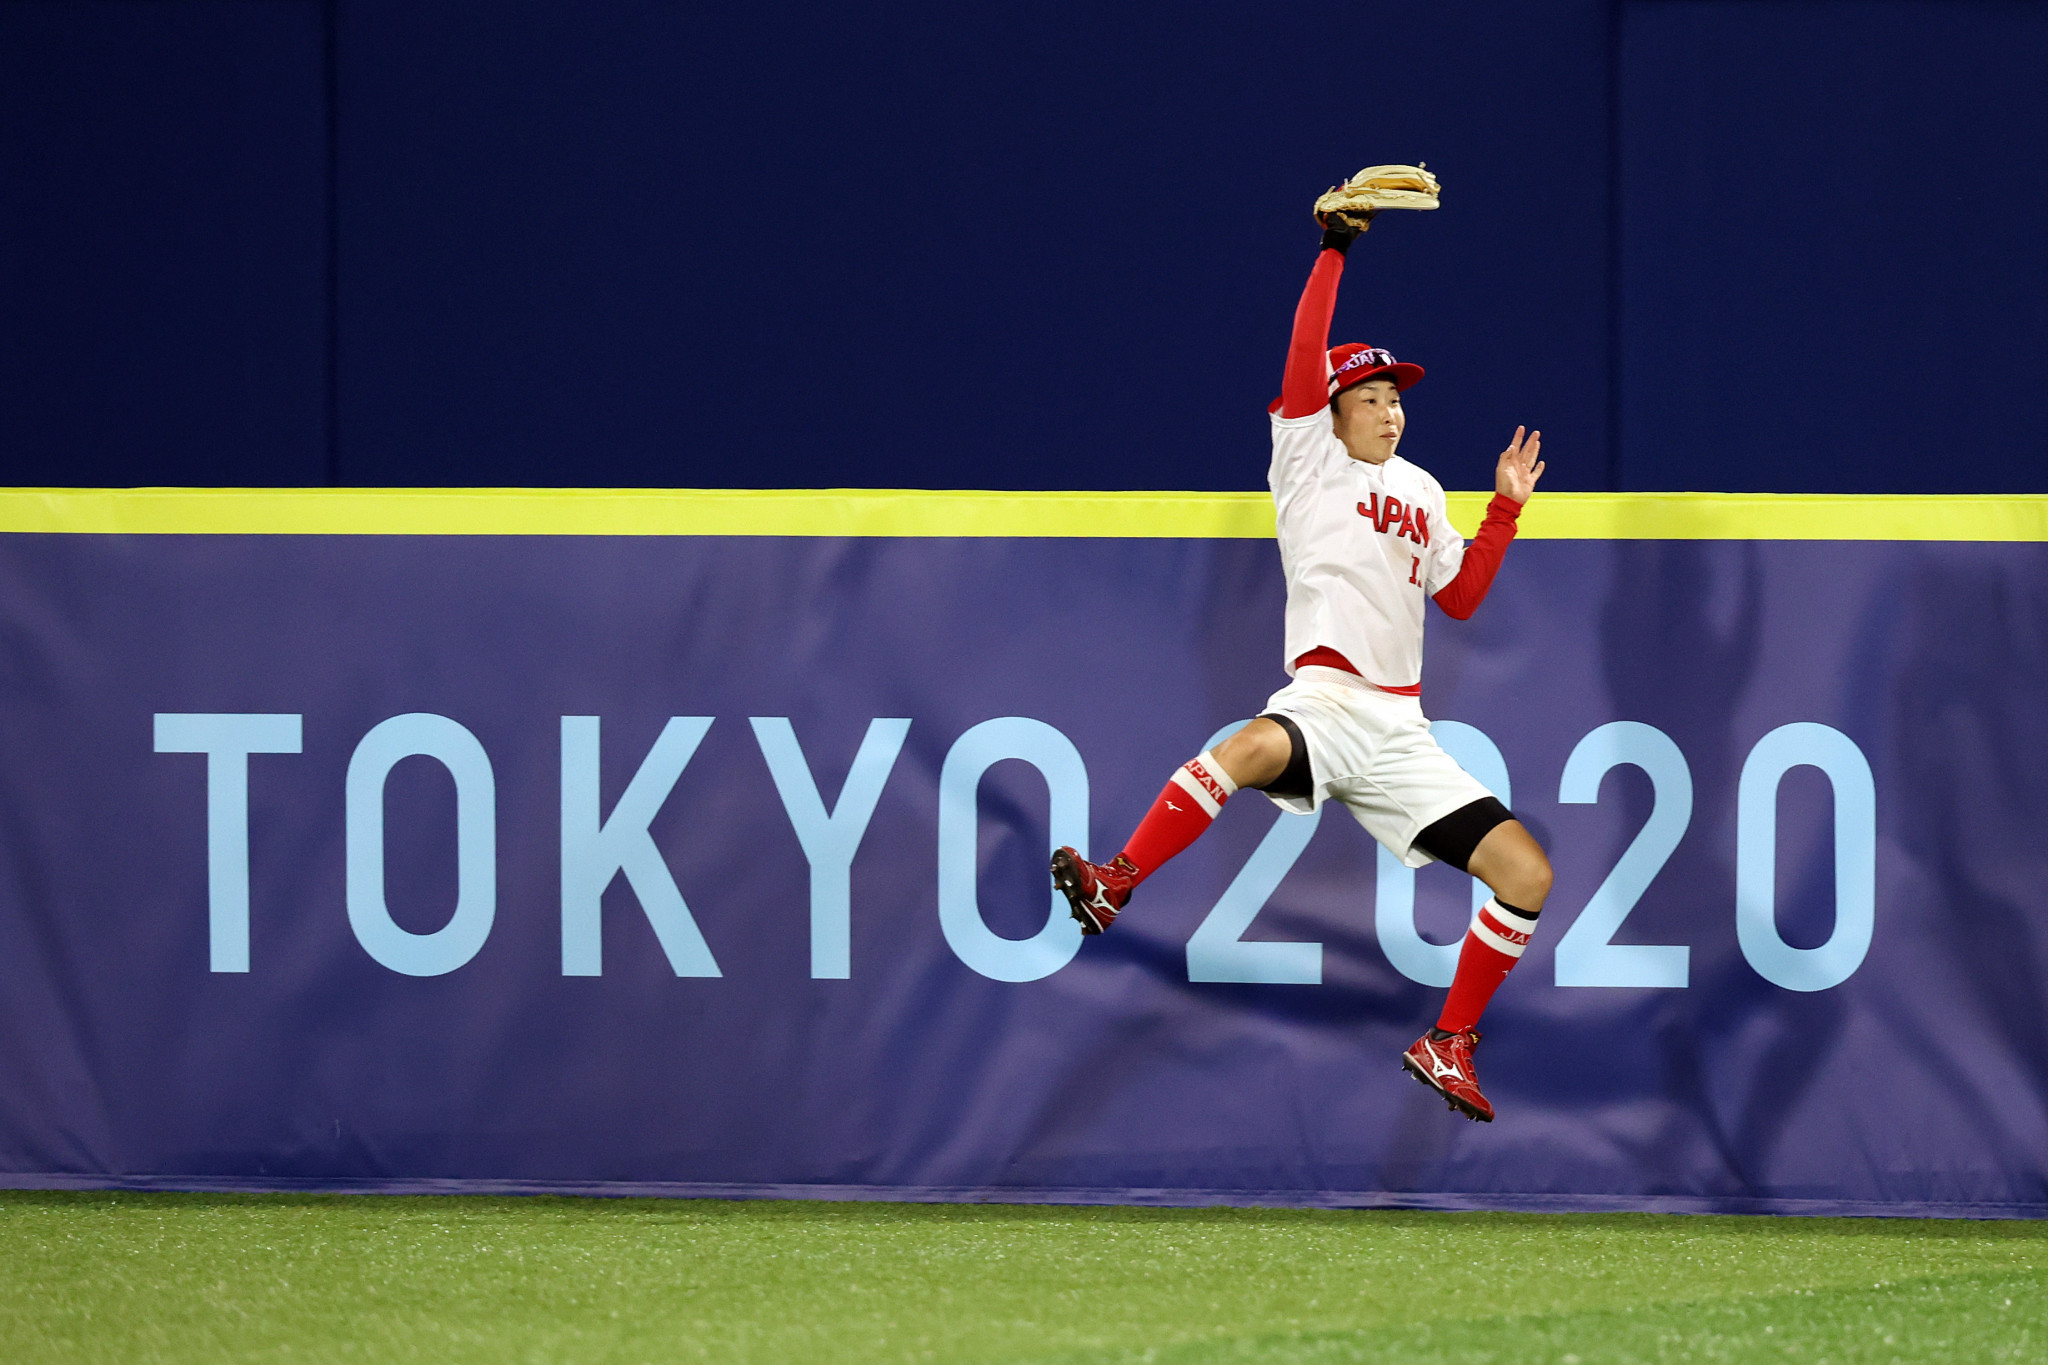 Baseball and softball returned to the Olympic programme at Tokyo 2020 ©Getty Images